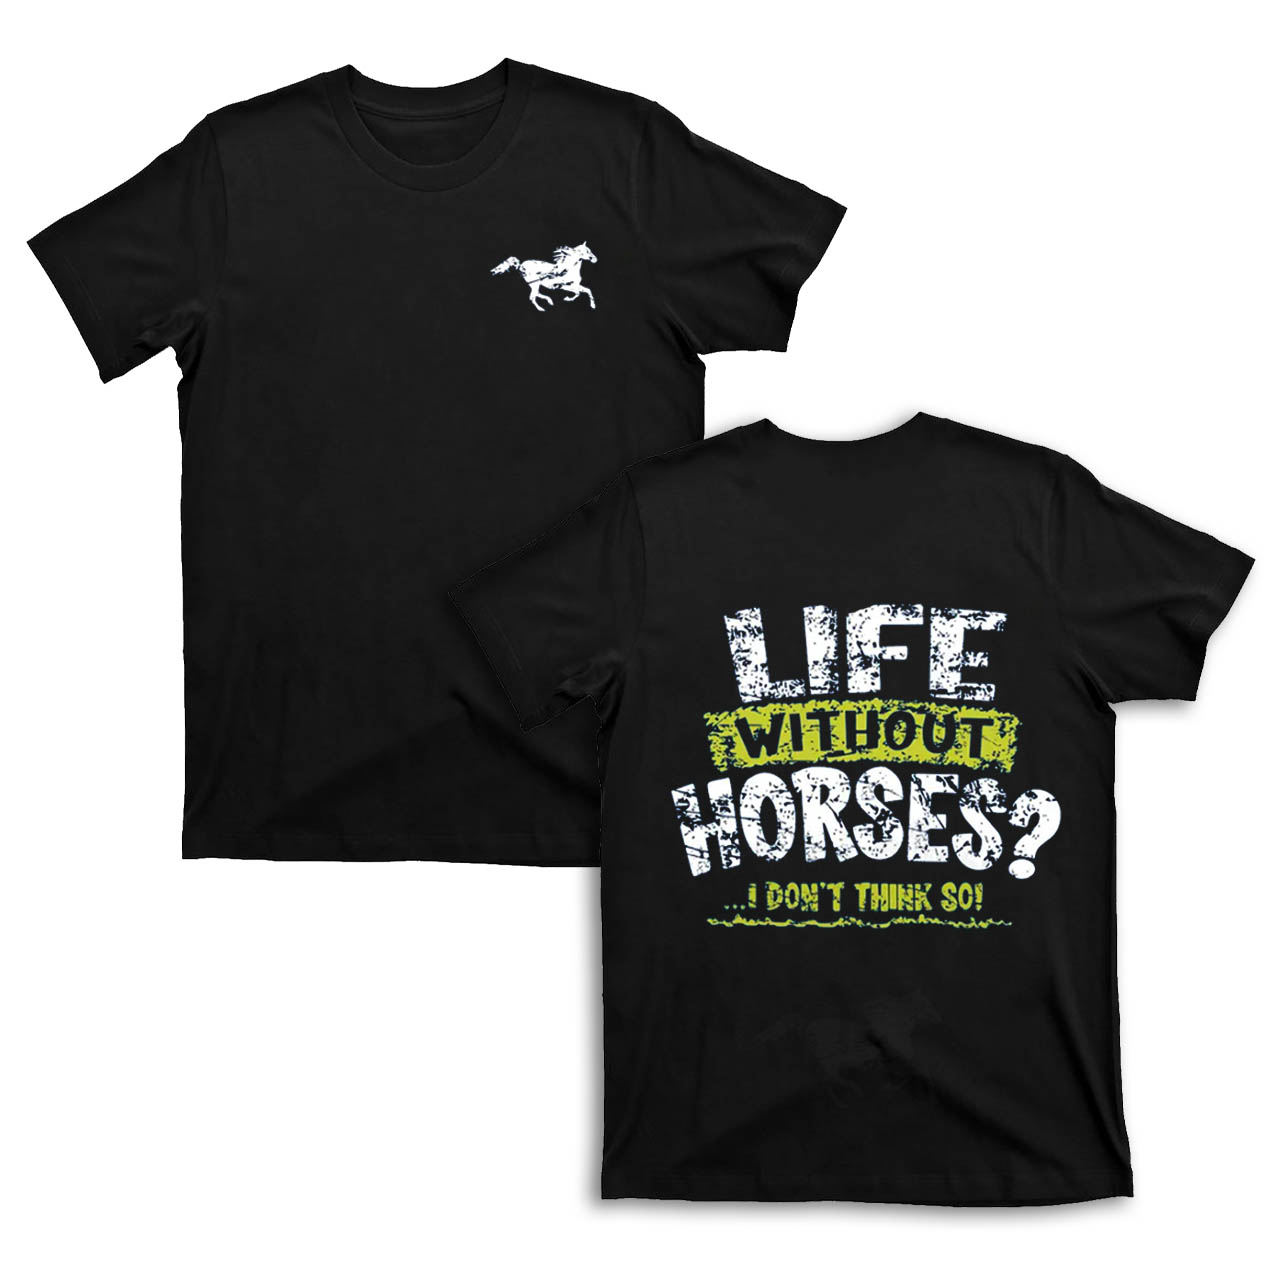 Life Without Horses?I Dont Think So! T-Shirts